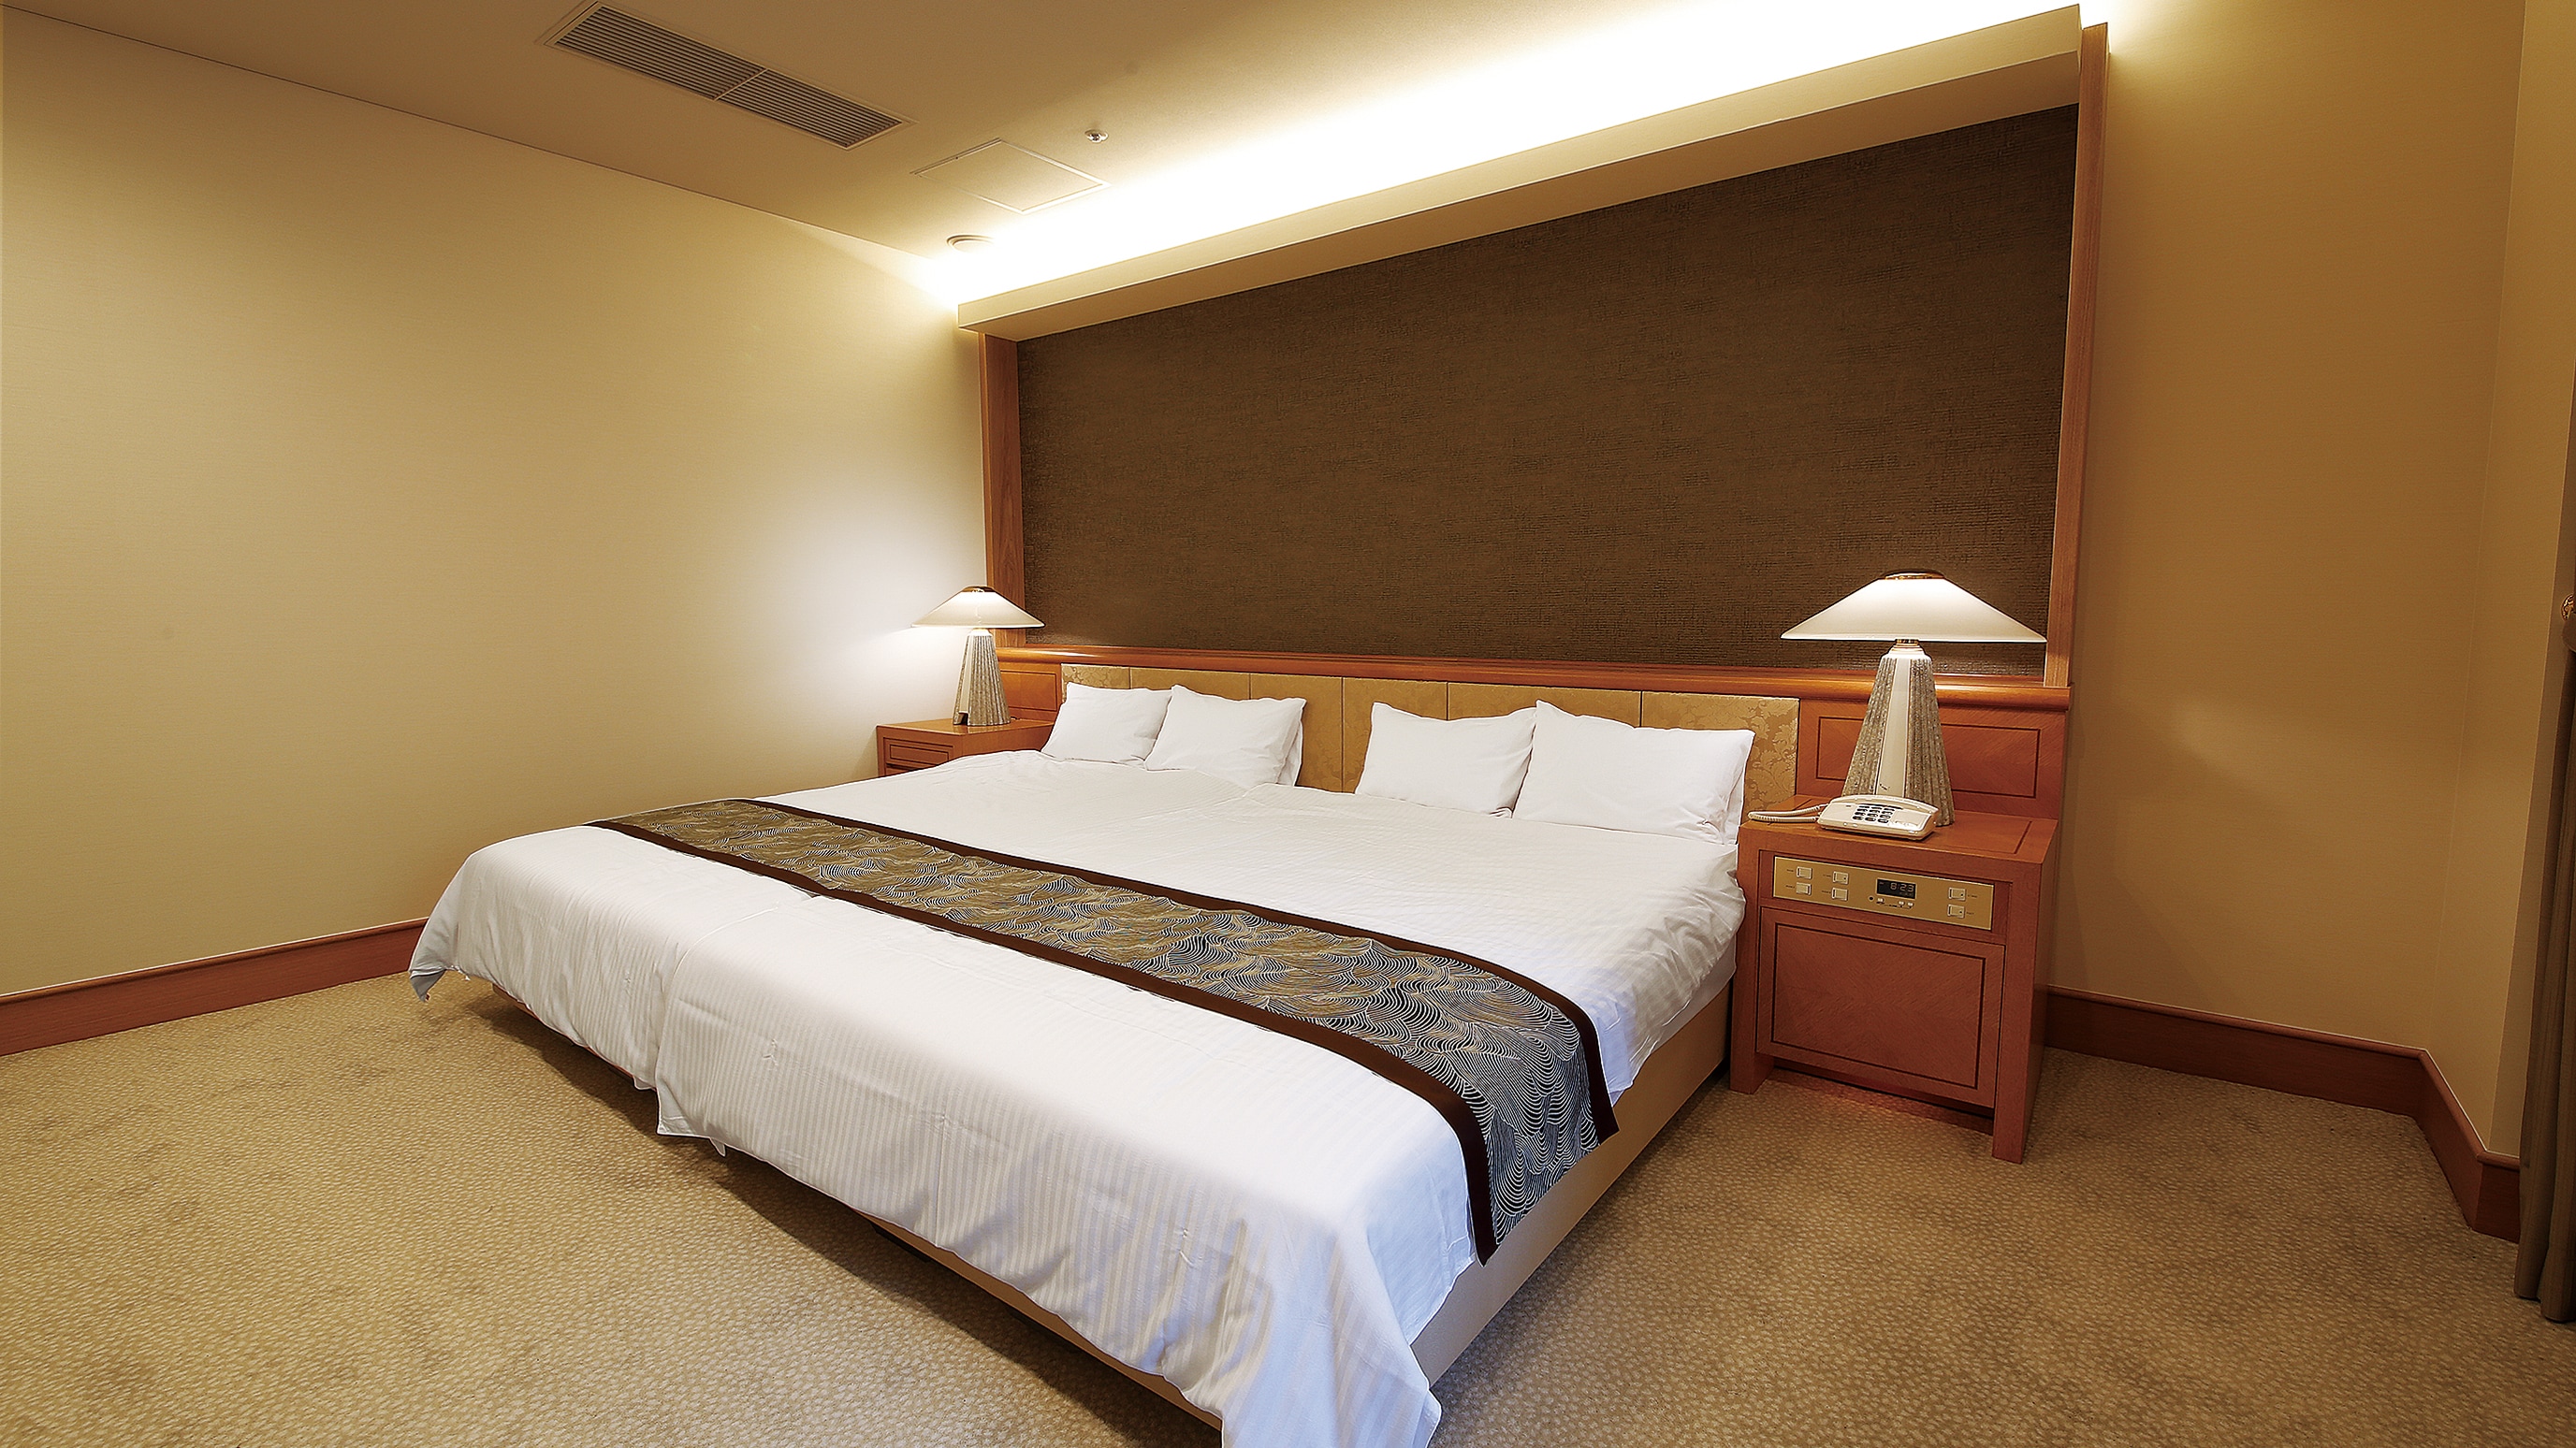 Royal Suite on the top floor ◆ Airweave mattresses are used for the beds. A gem that top athletes also love.